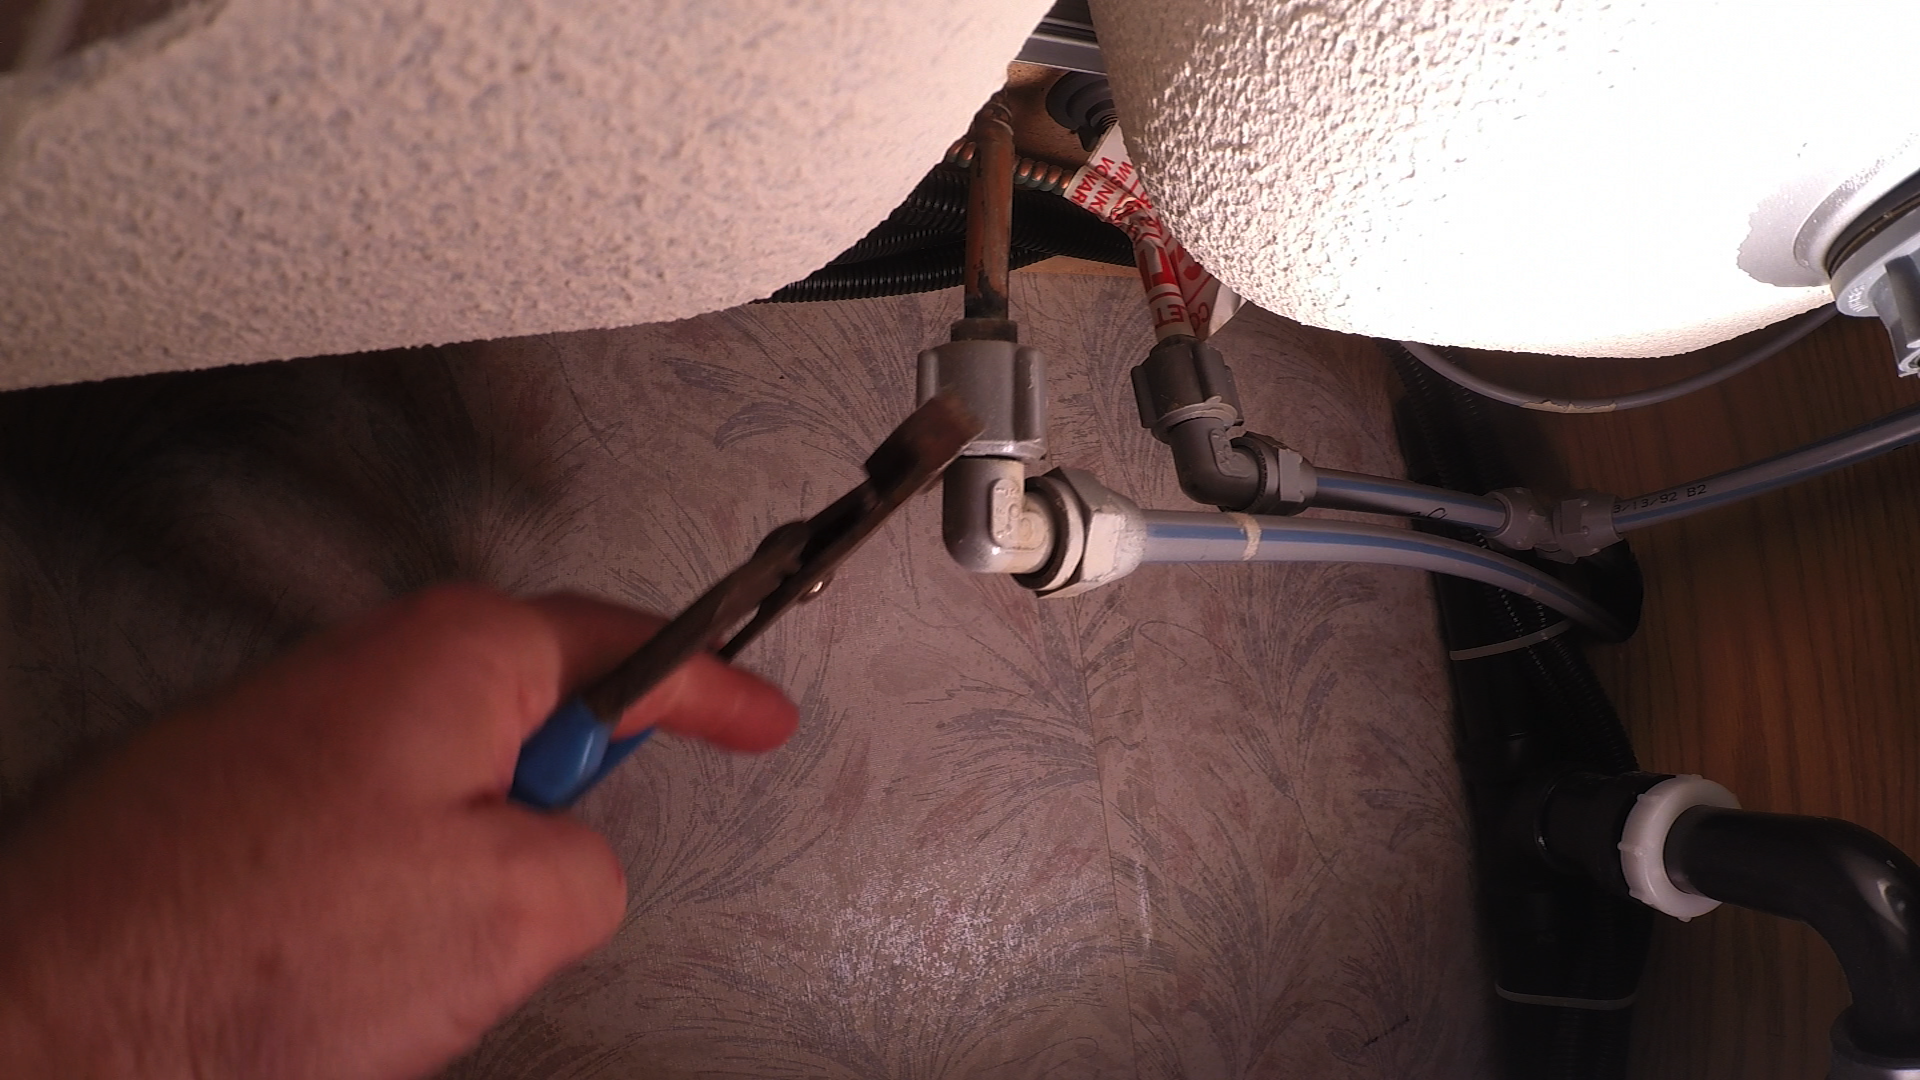 Fixing a pipe under a sink